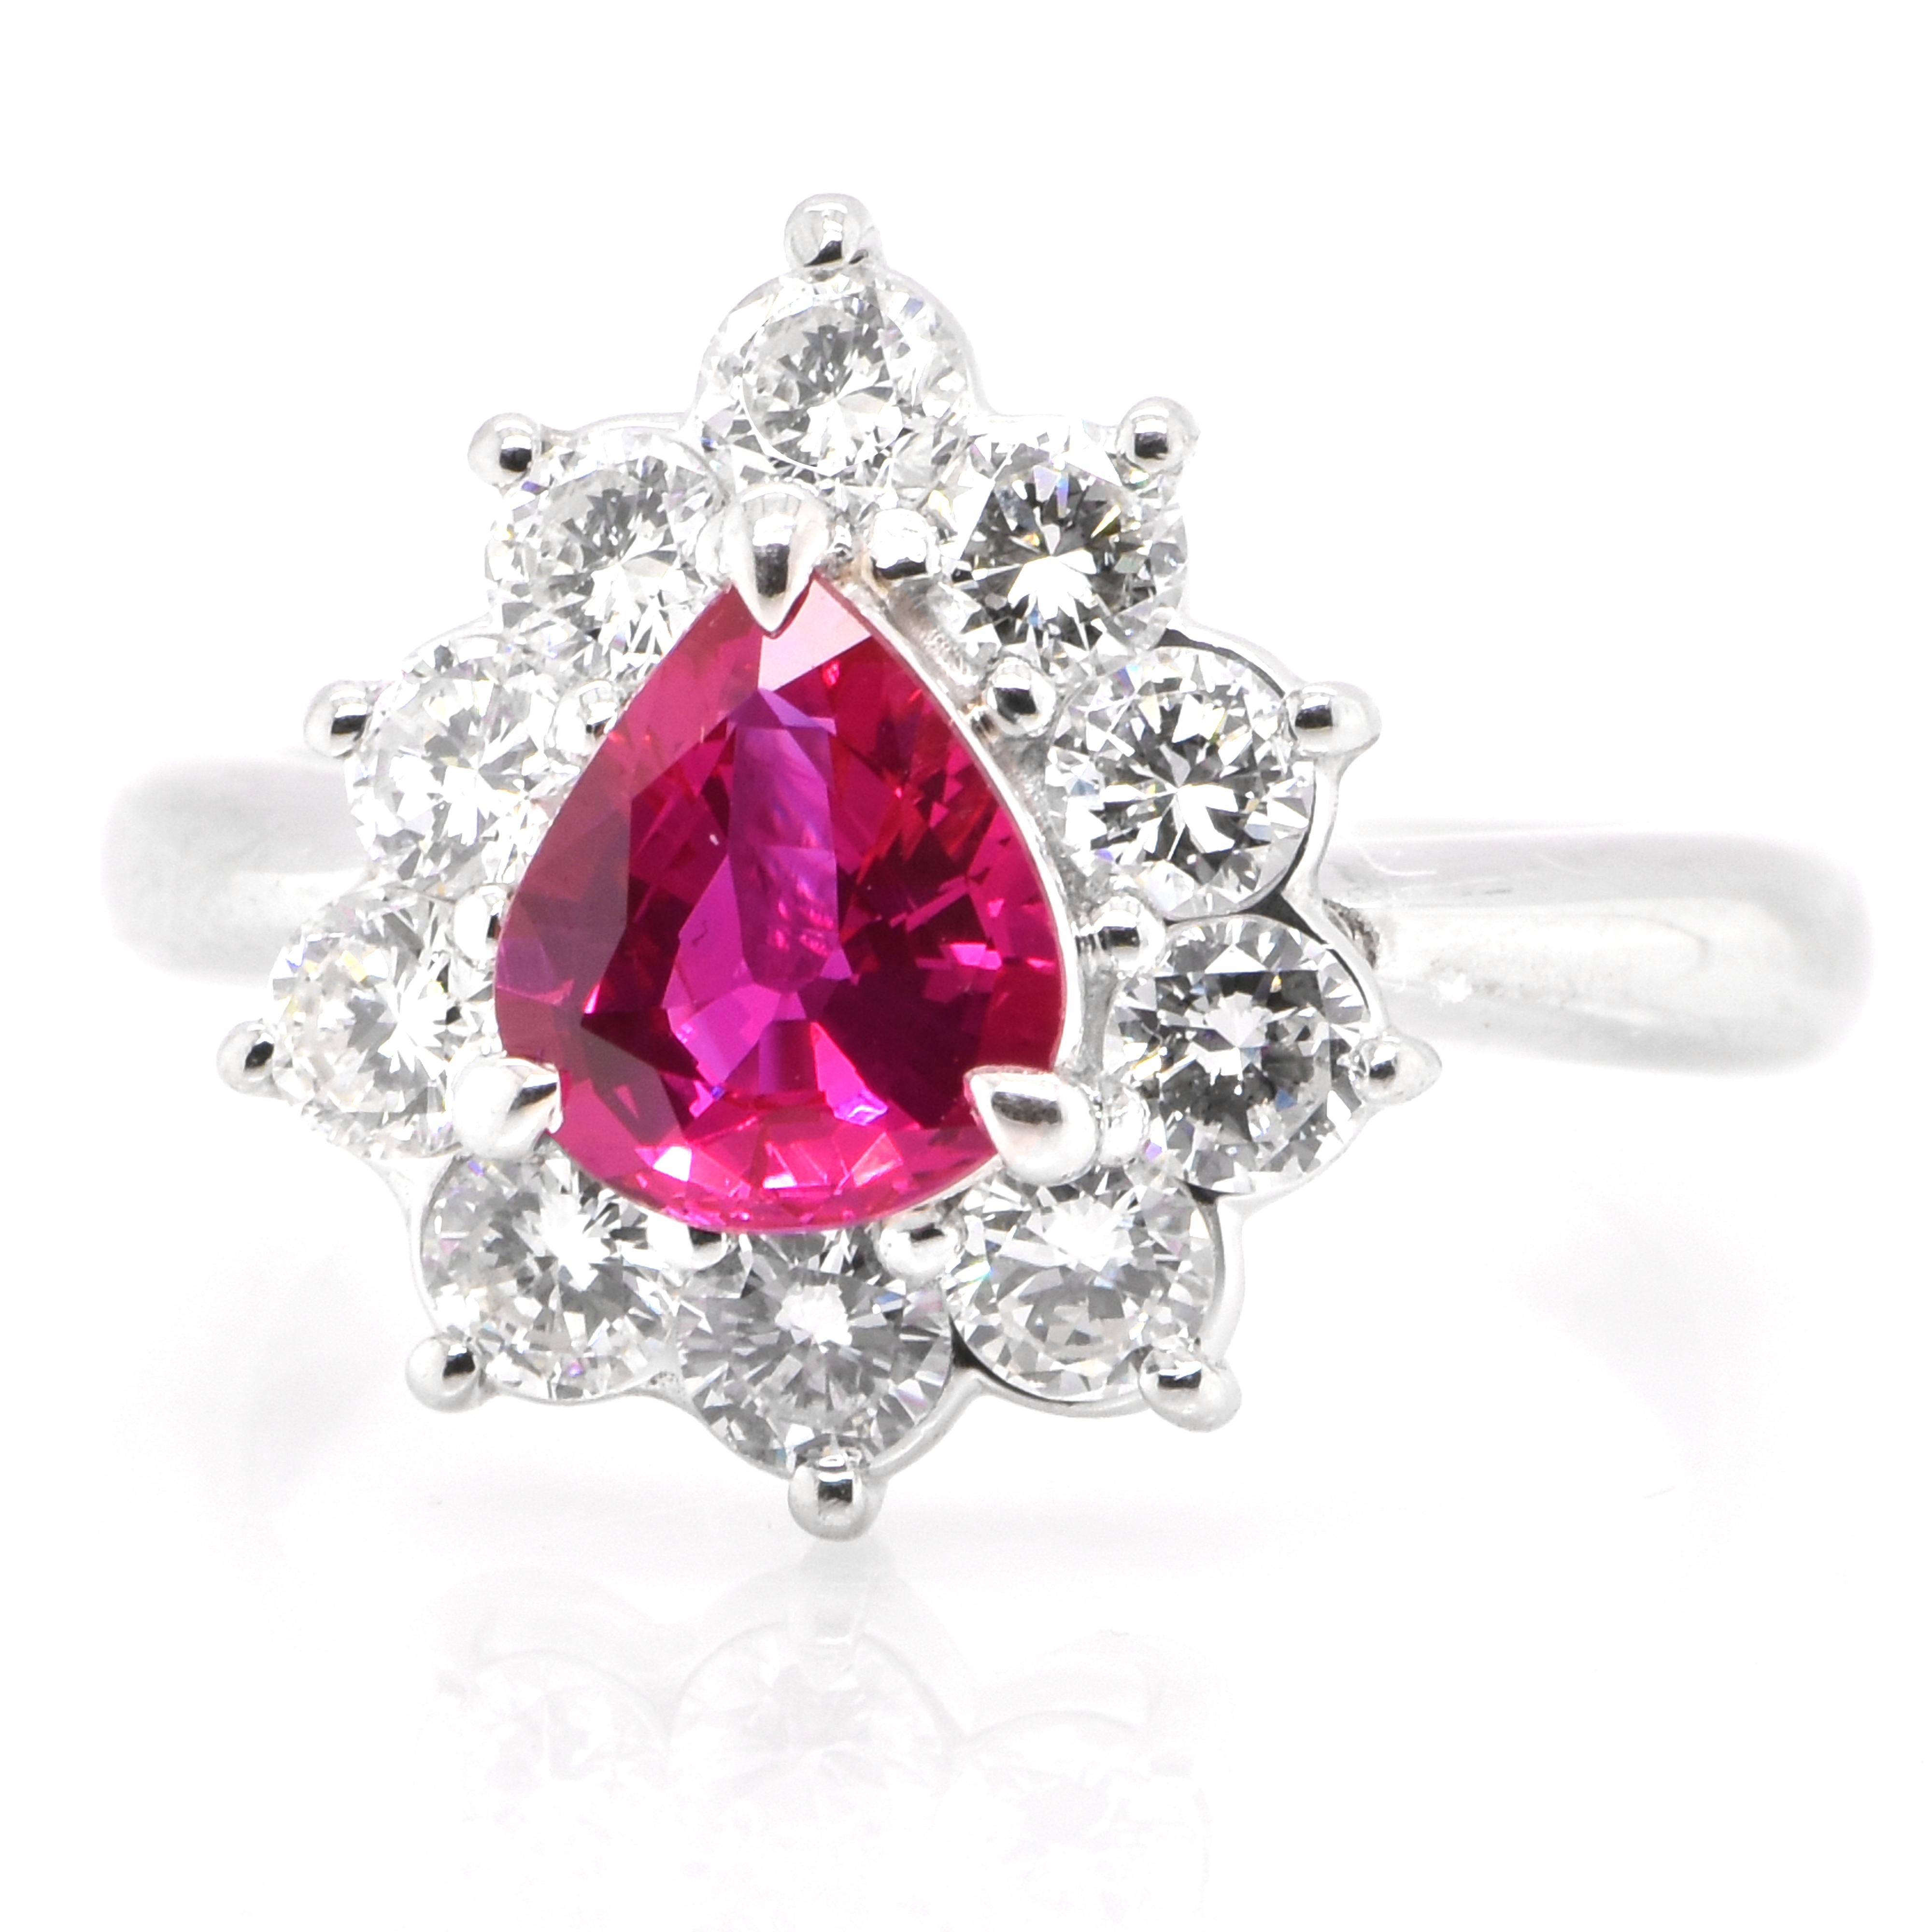 A beautiful ring set in Platinum featuring a 1.11 Carat Natural Pear Cut Ruby and 0.94 Carat Diamonds. Rubies are referred to as 